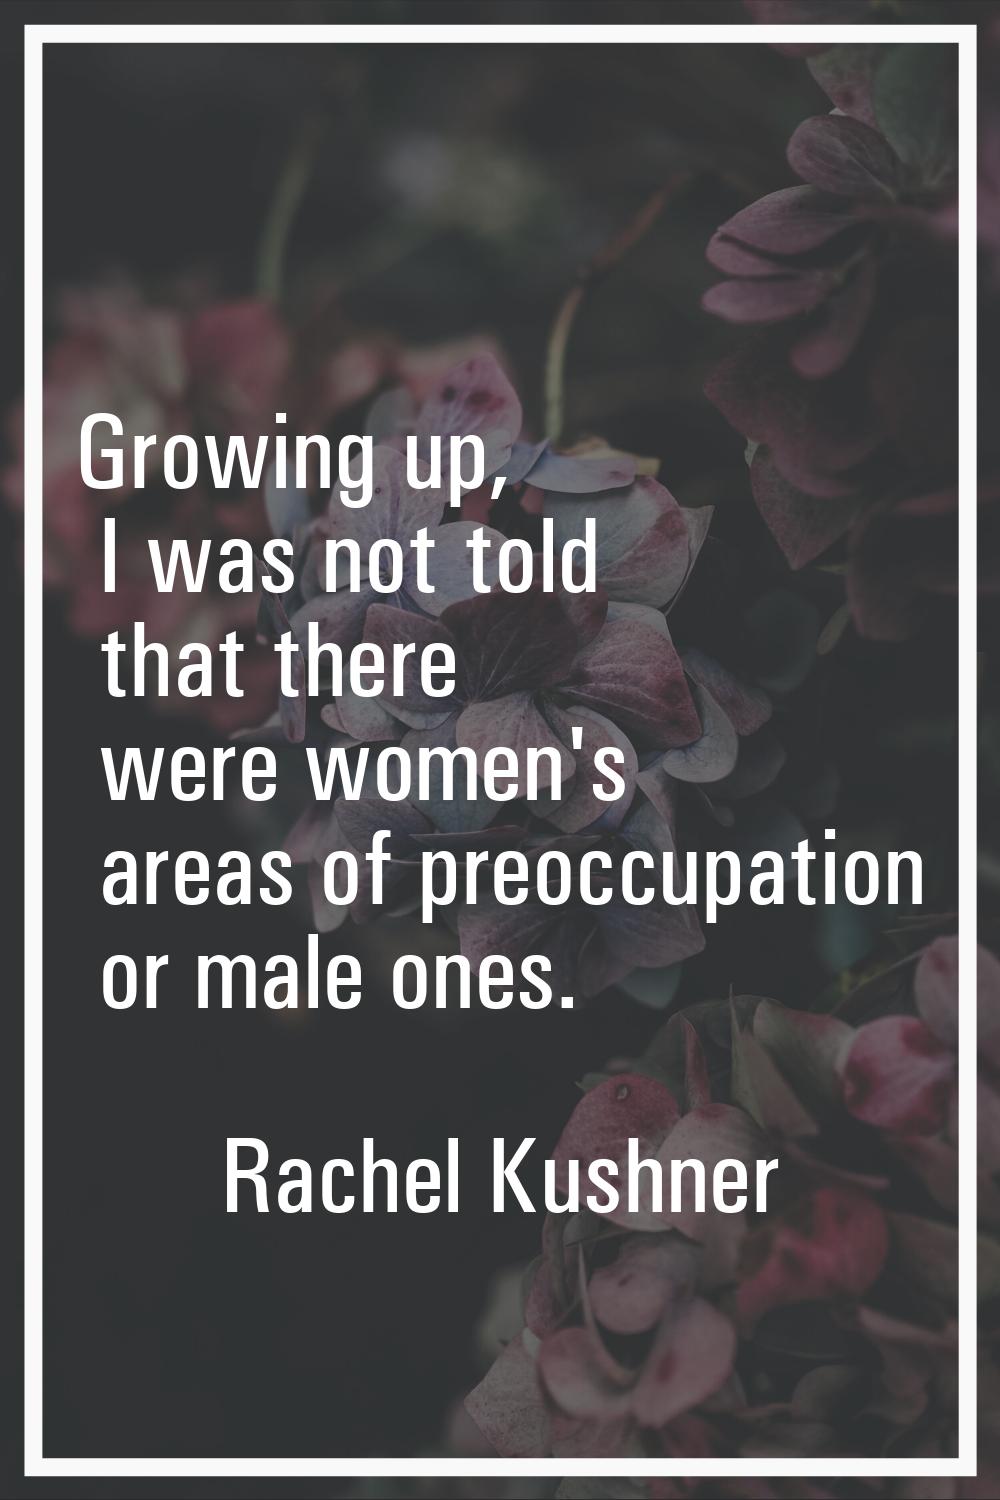 Growing up, I was not told that there were women's areas of preoccupation or male ones.